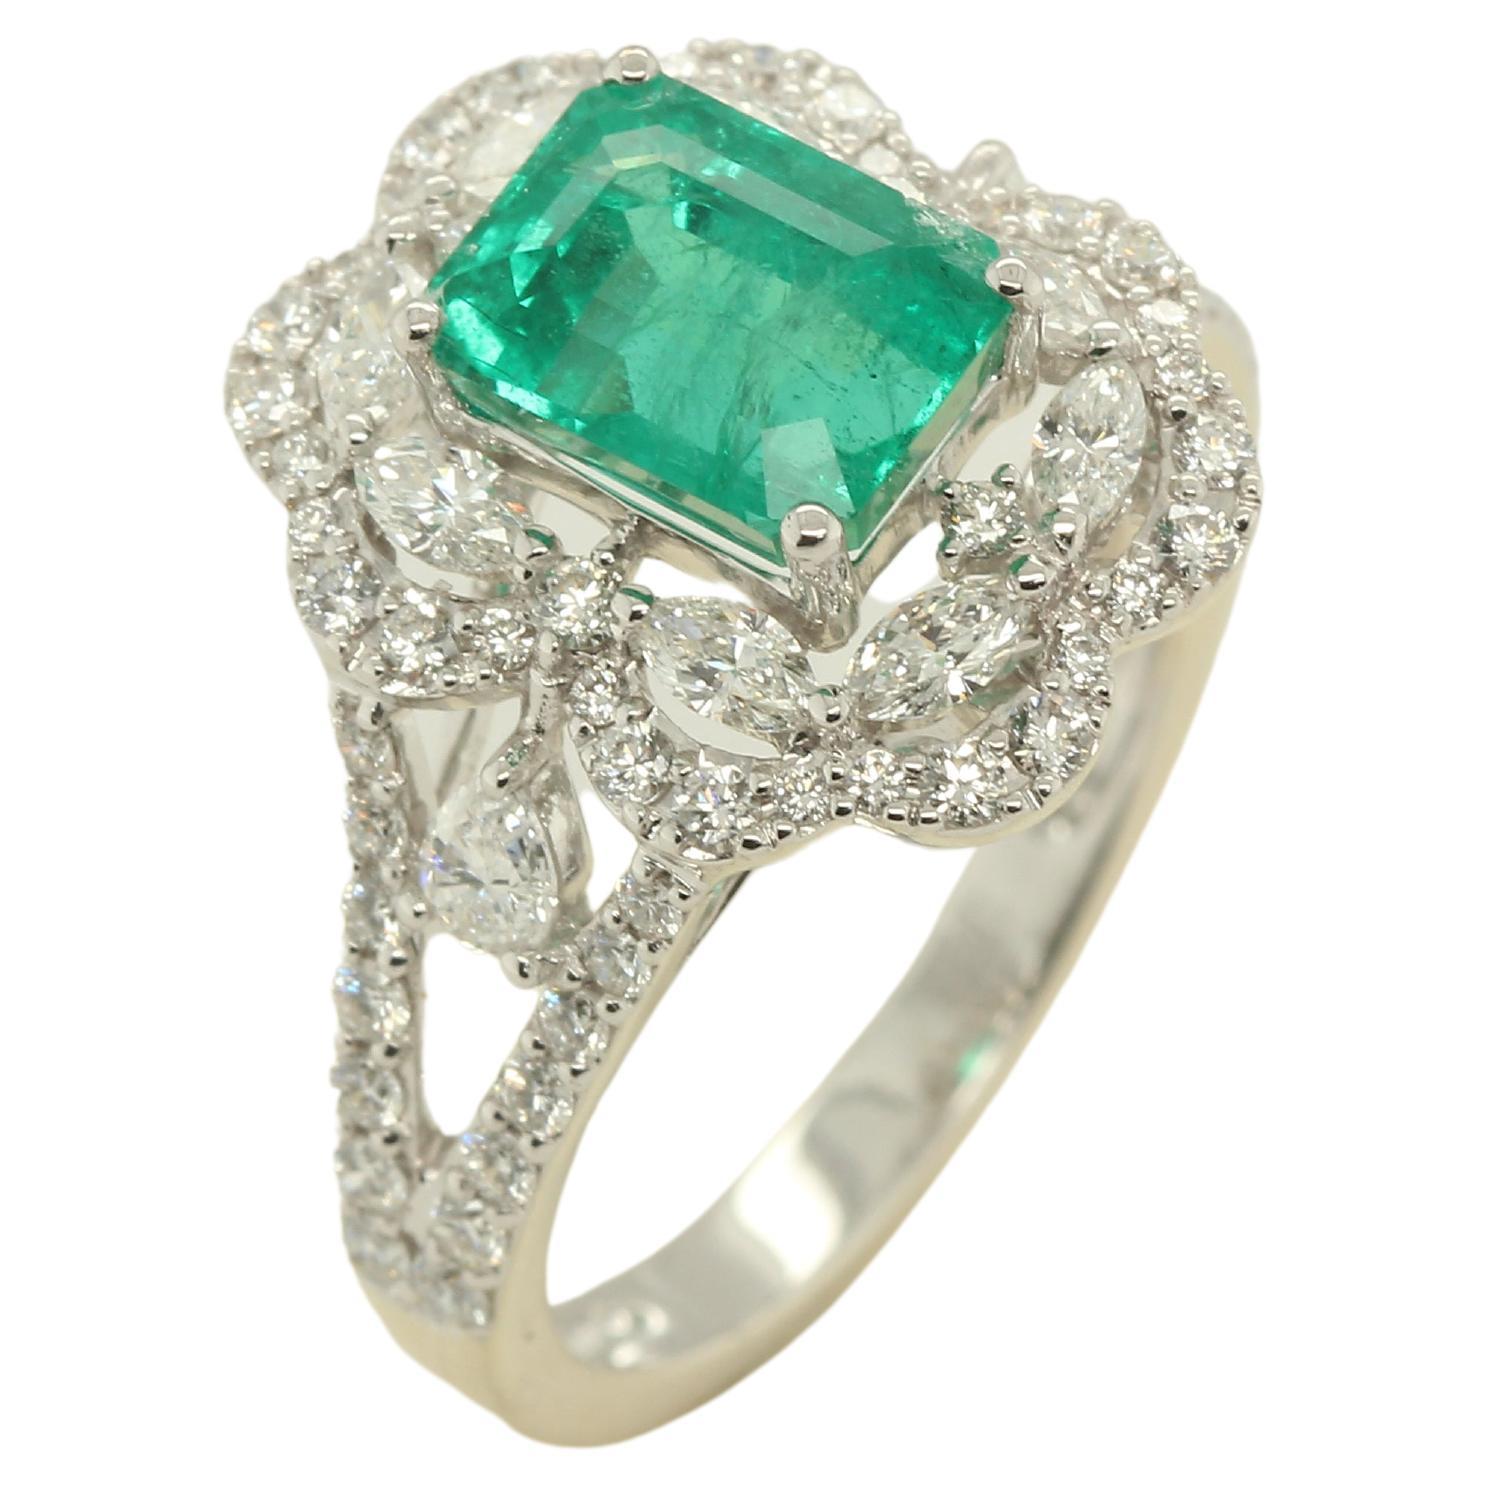 2.05 Carat Emerald and Diamond Ring in 18 Karat Gold For Sale